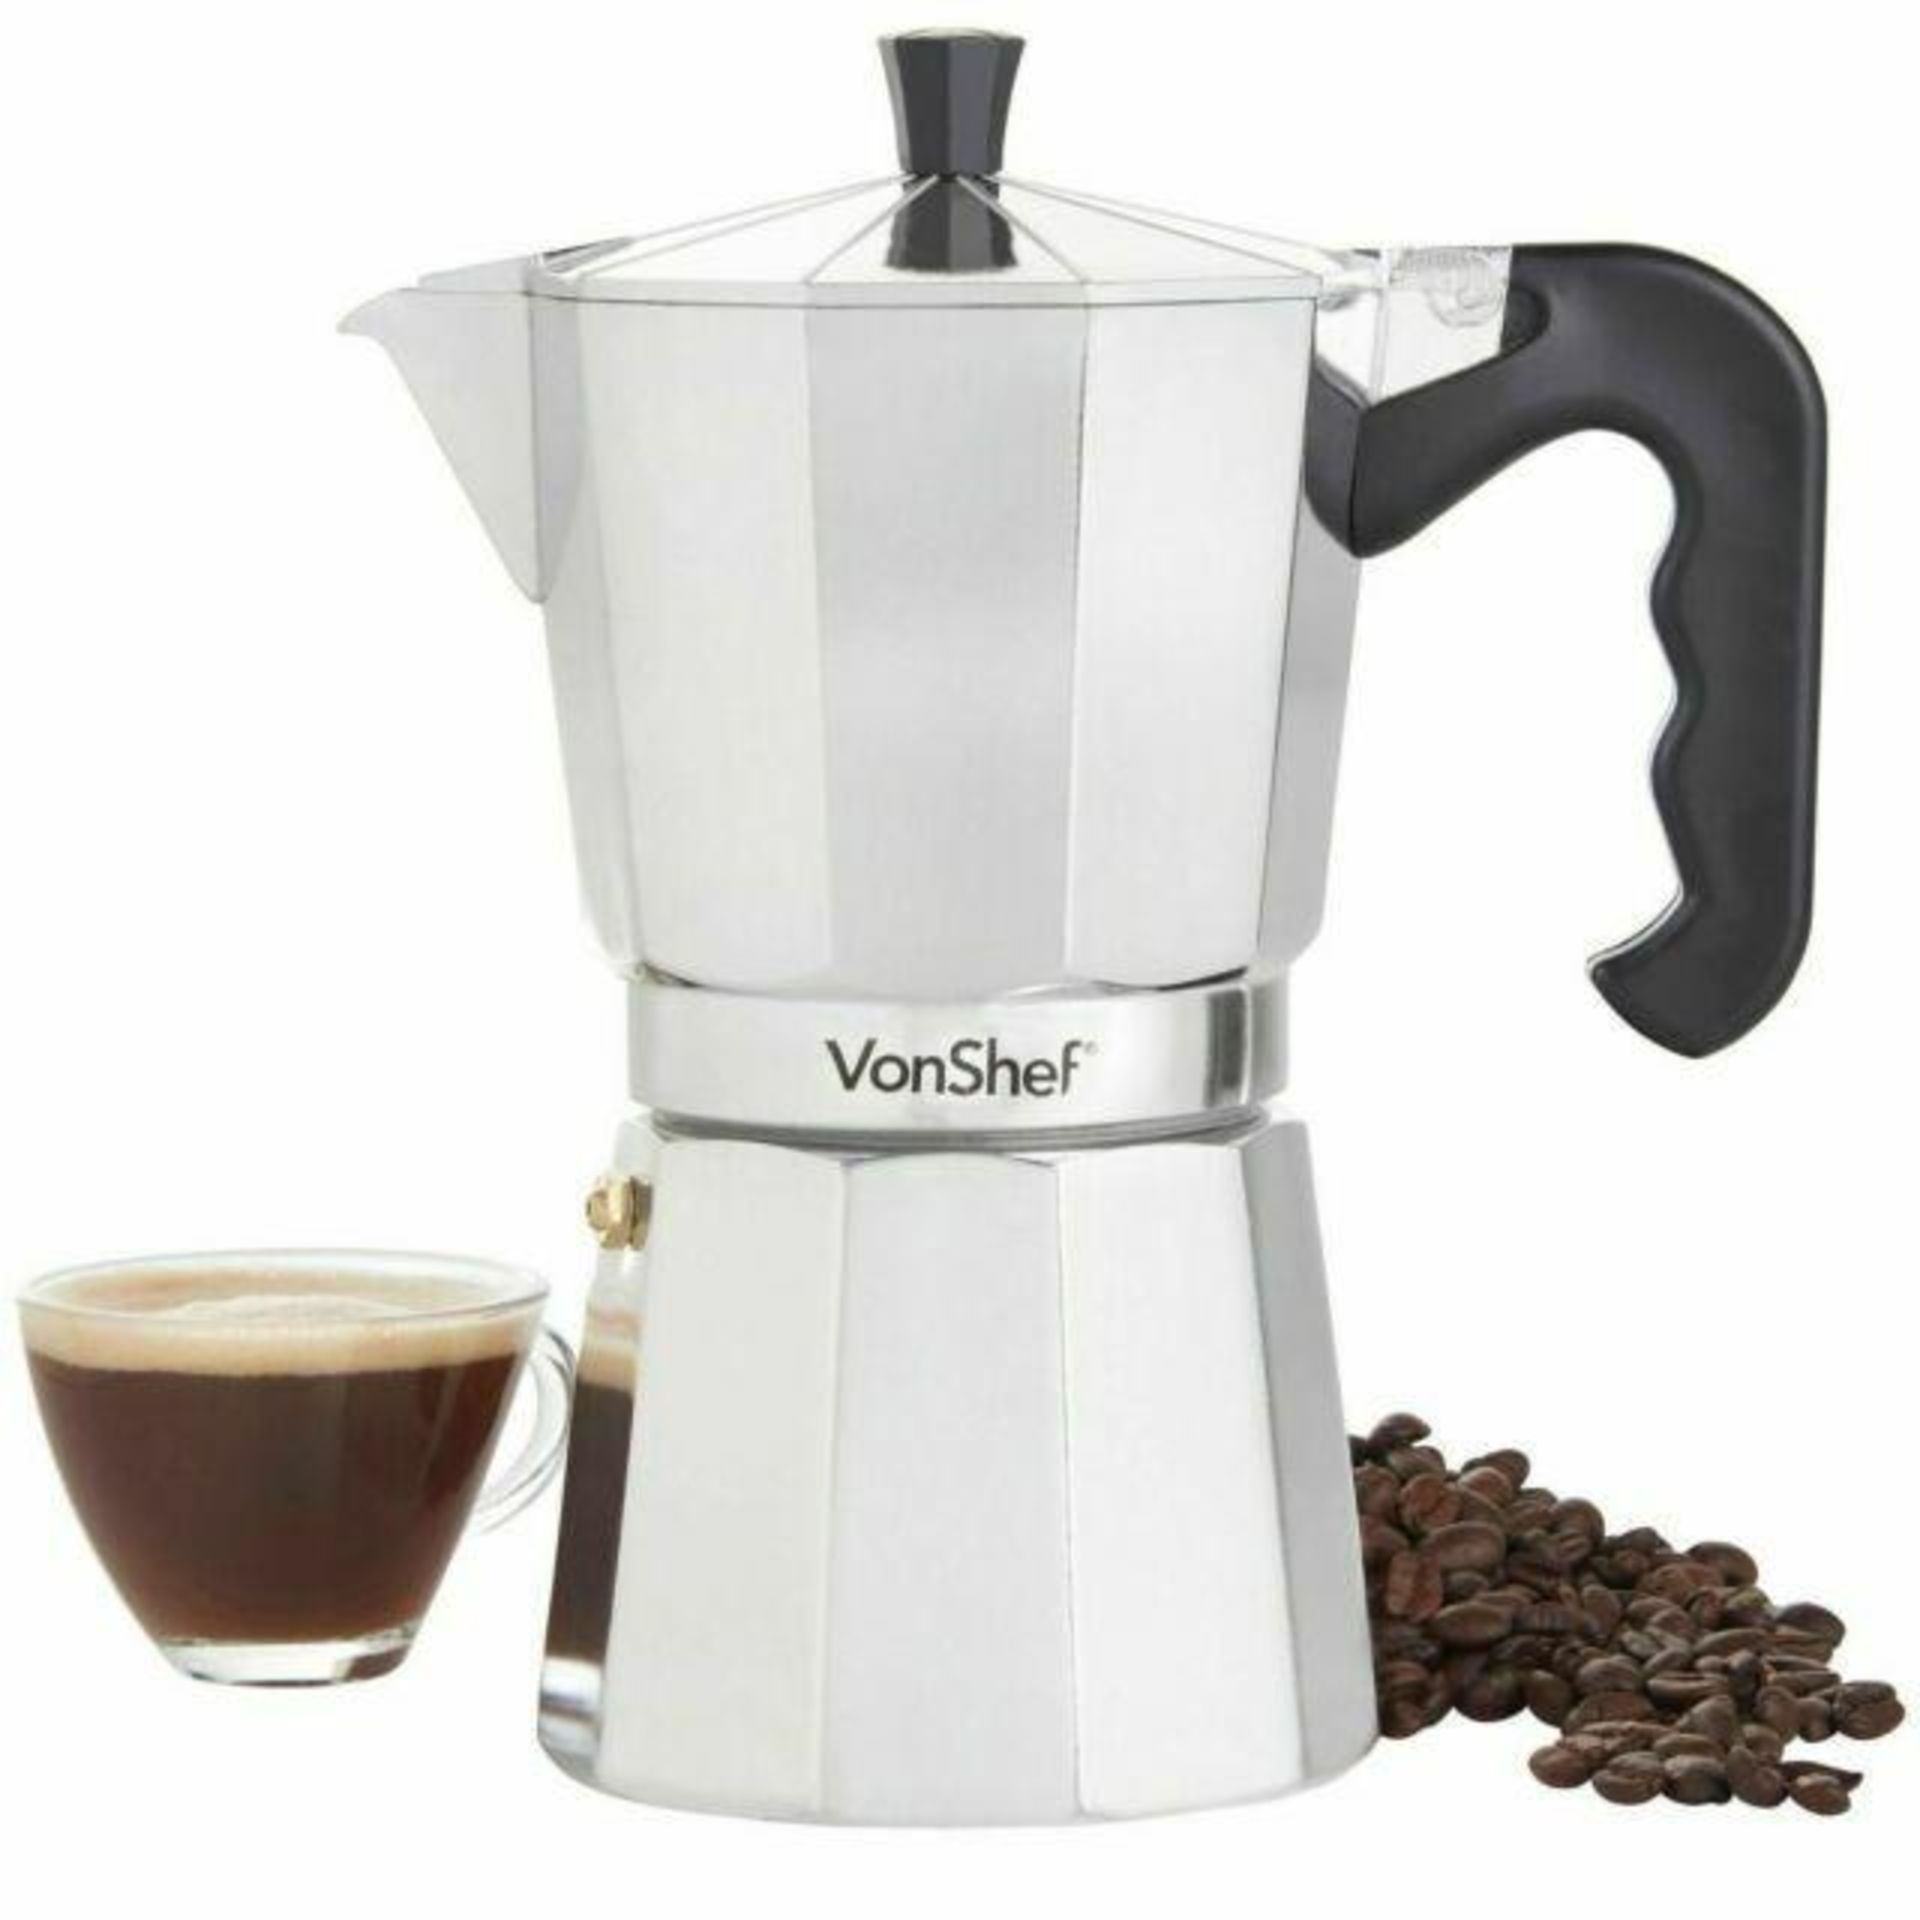 Luxury 9 Cup Espresso Maker 1000202 - S2. Product information Master the art of authentic espresso